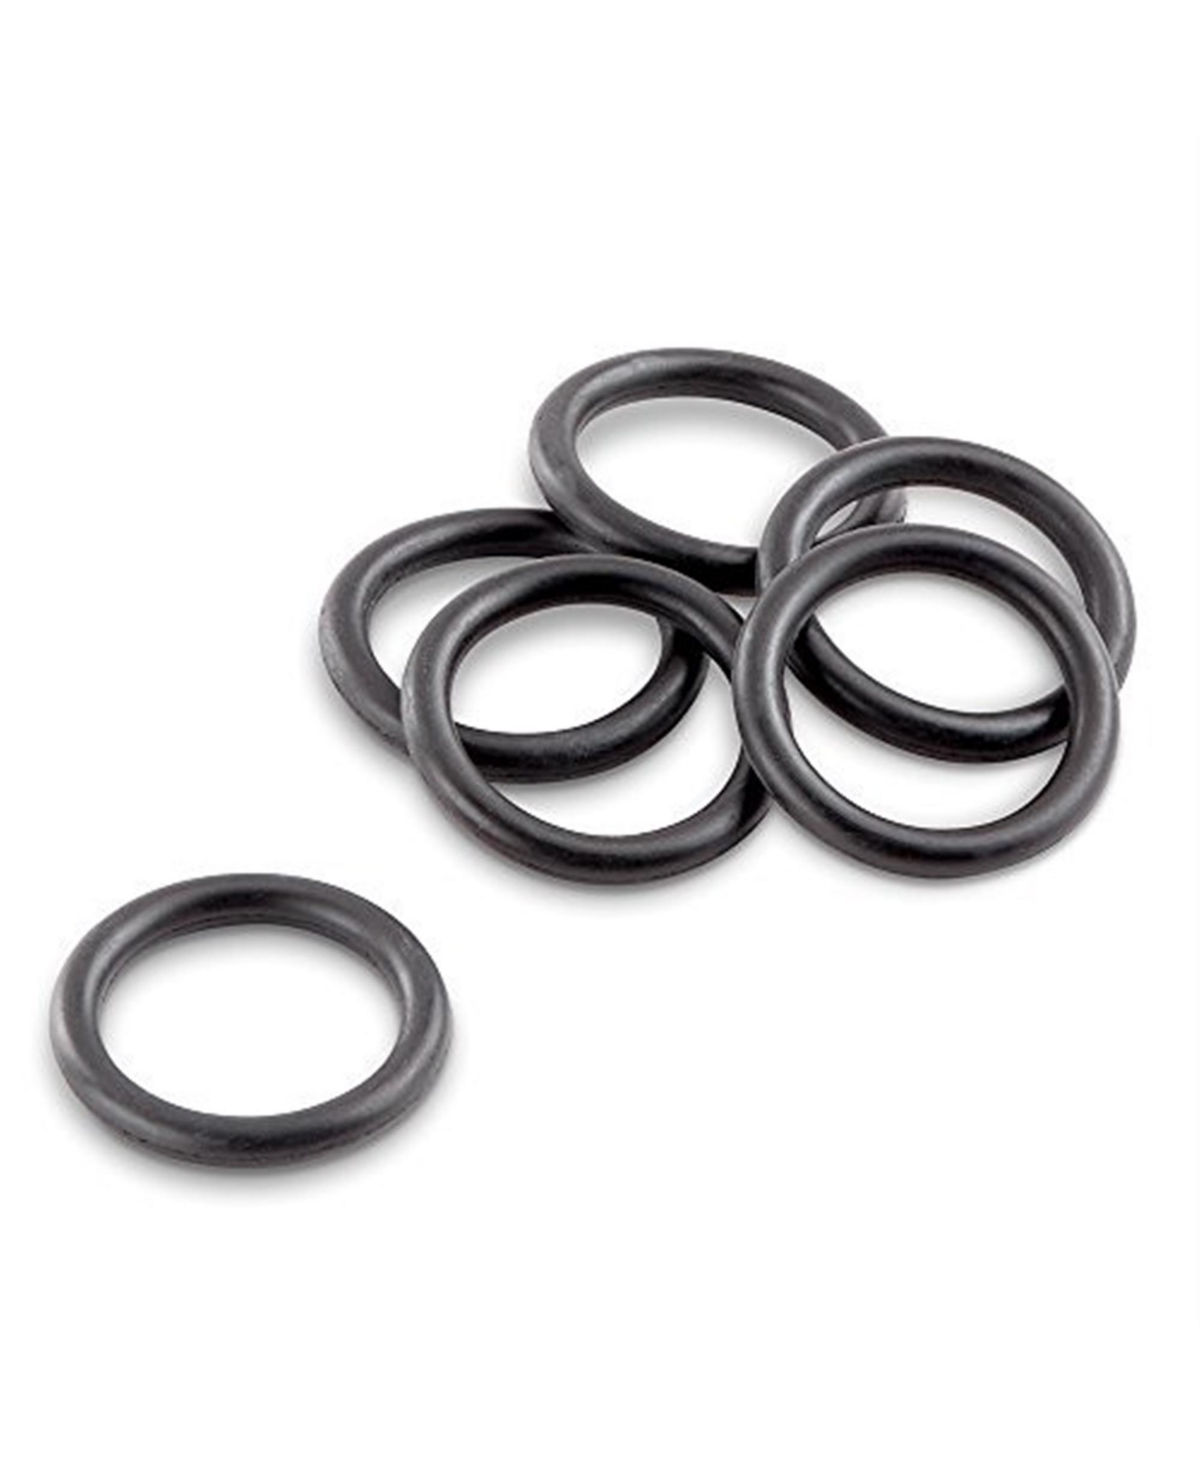 Pro G58 8110041001 O-Ring Rubber Replacement Seals, 6 Pack - Navy Blue